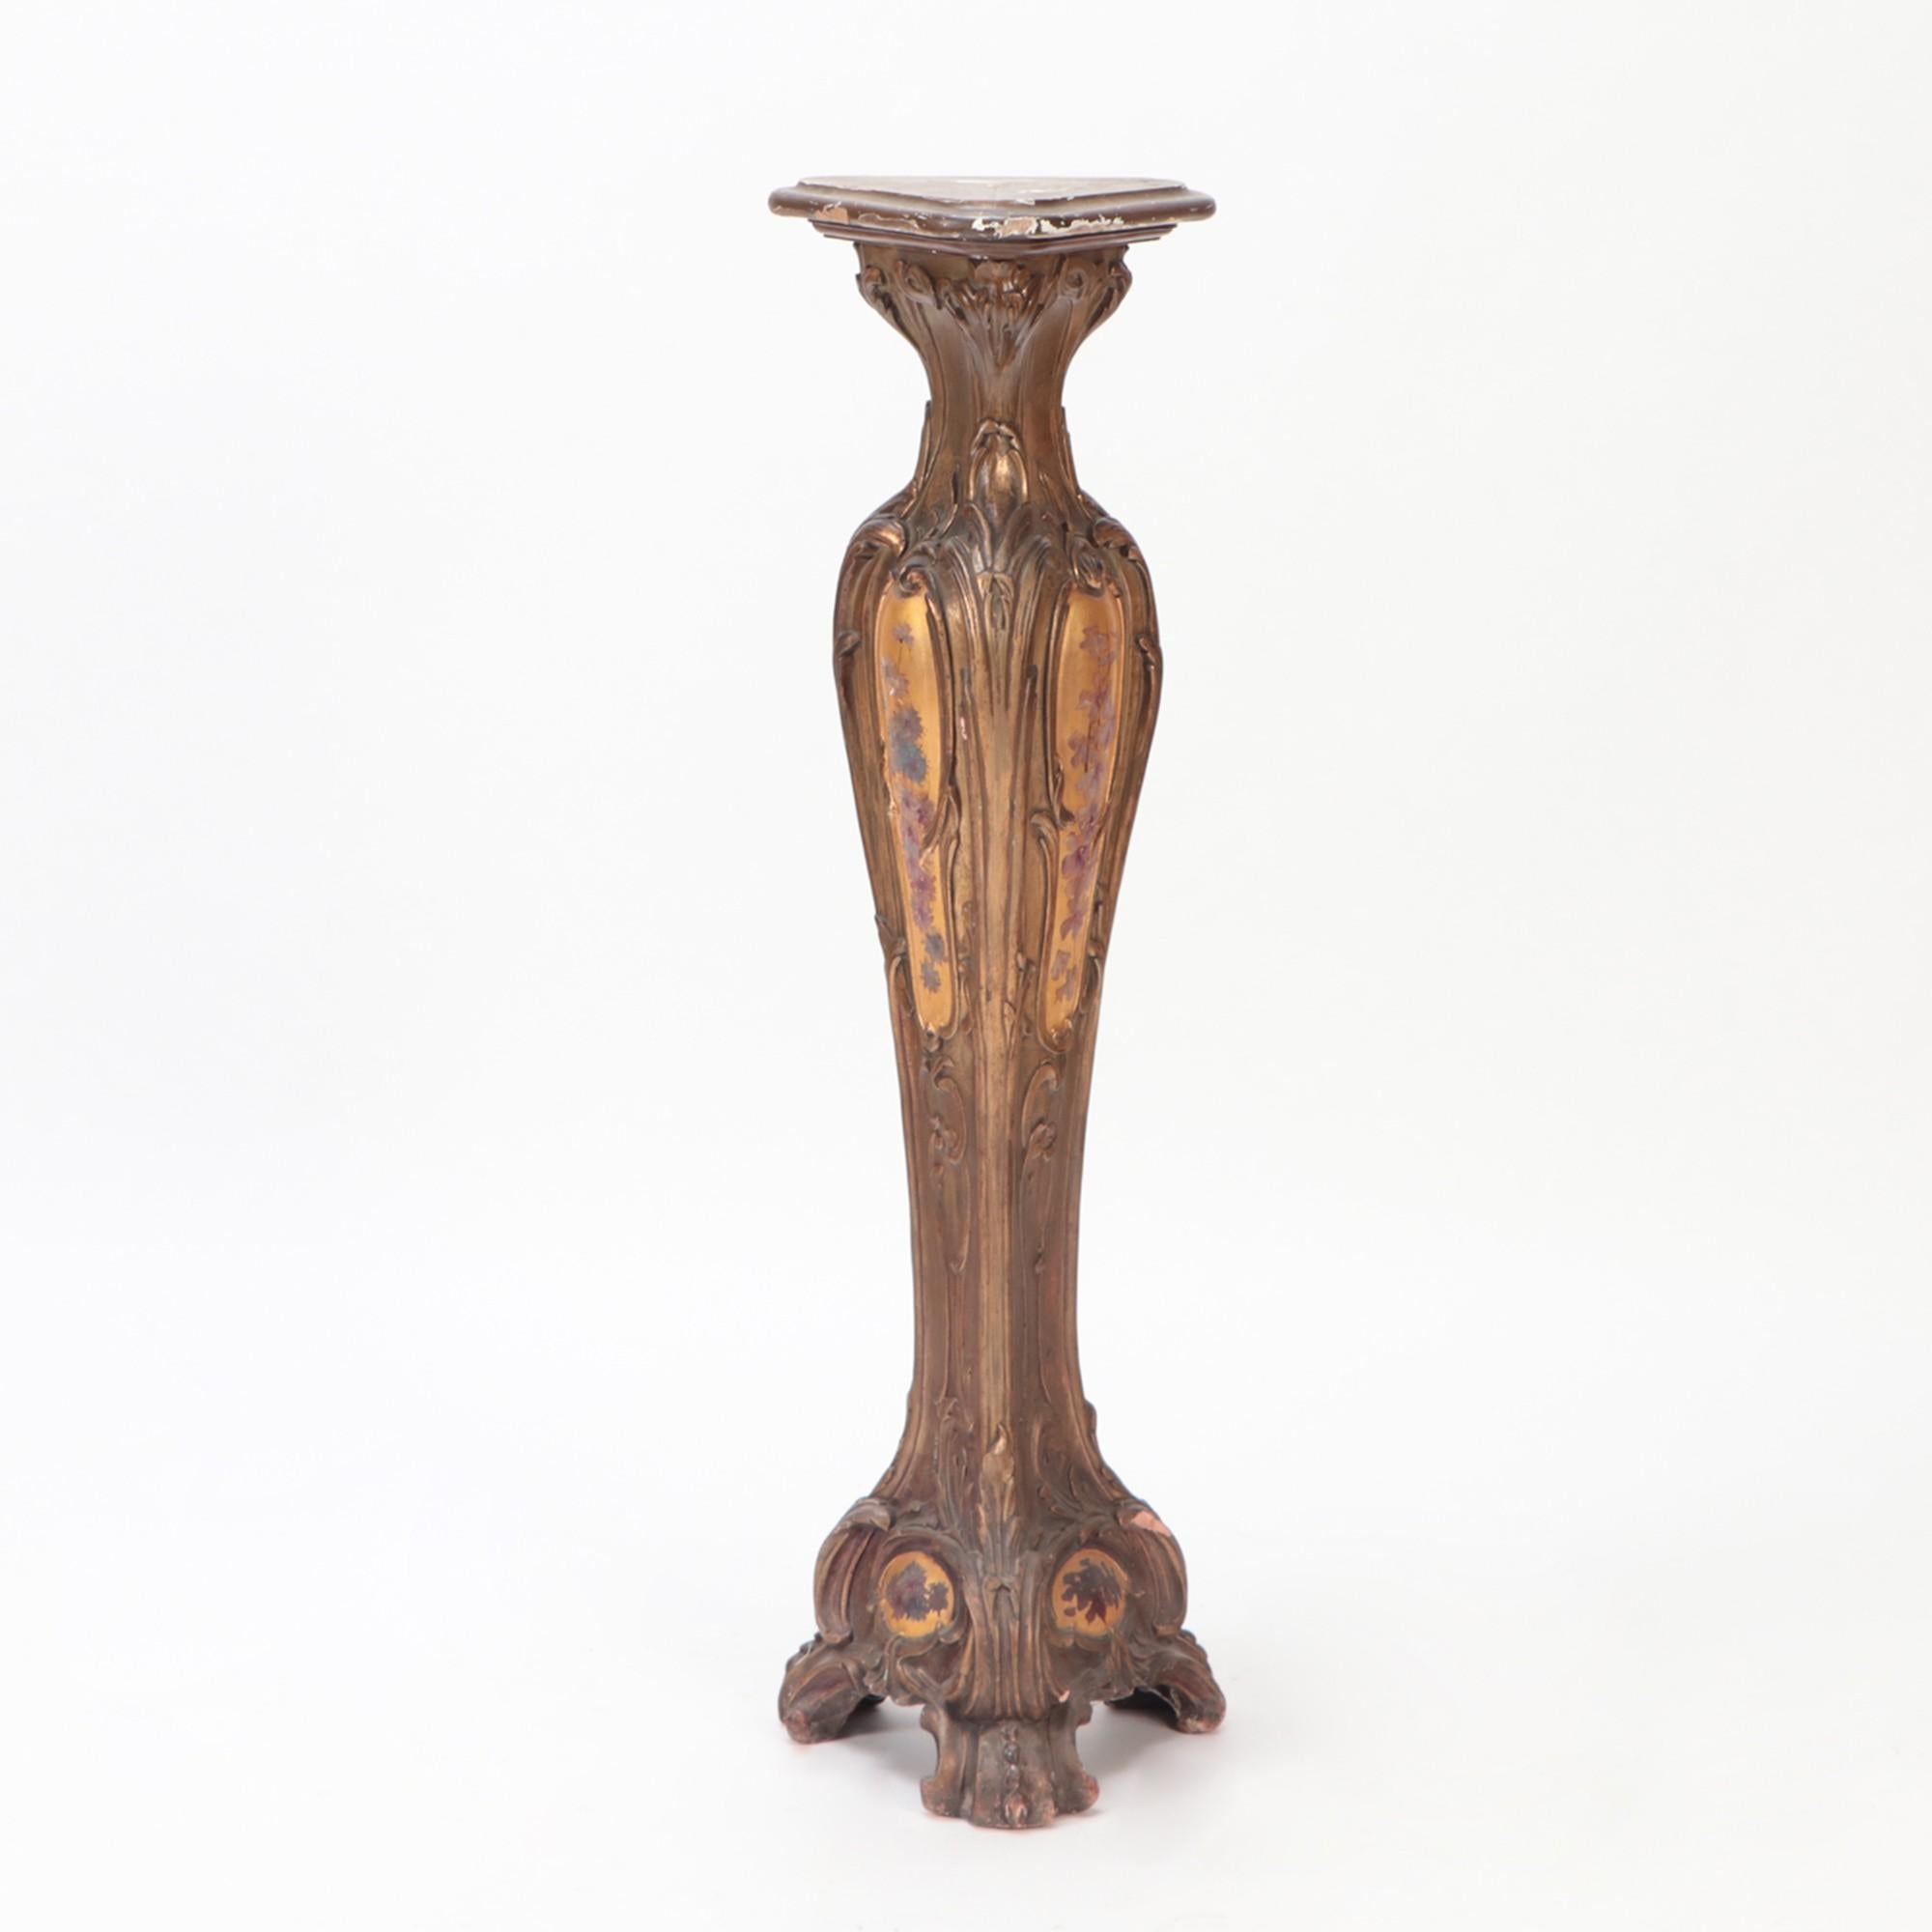 A very decorative French Bombay pedestal with paint decoration circa 1900.